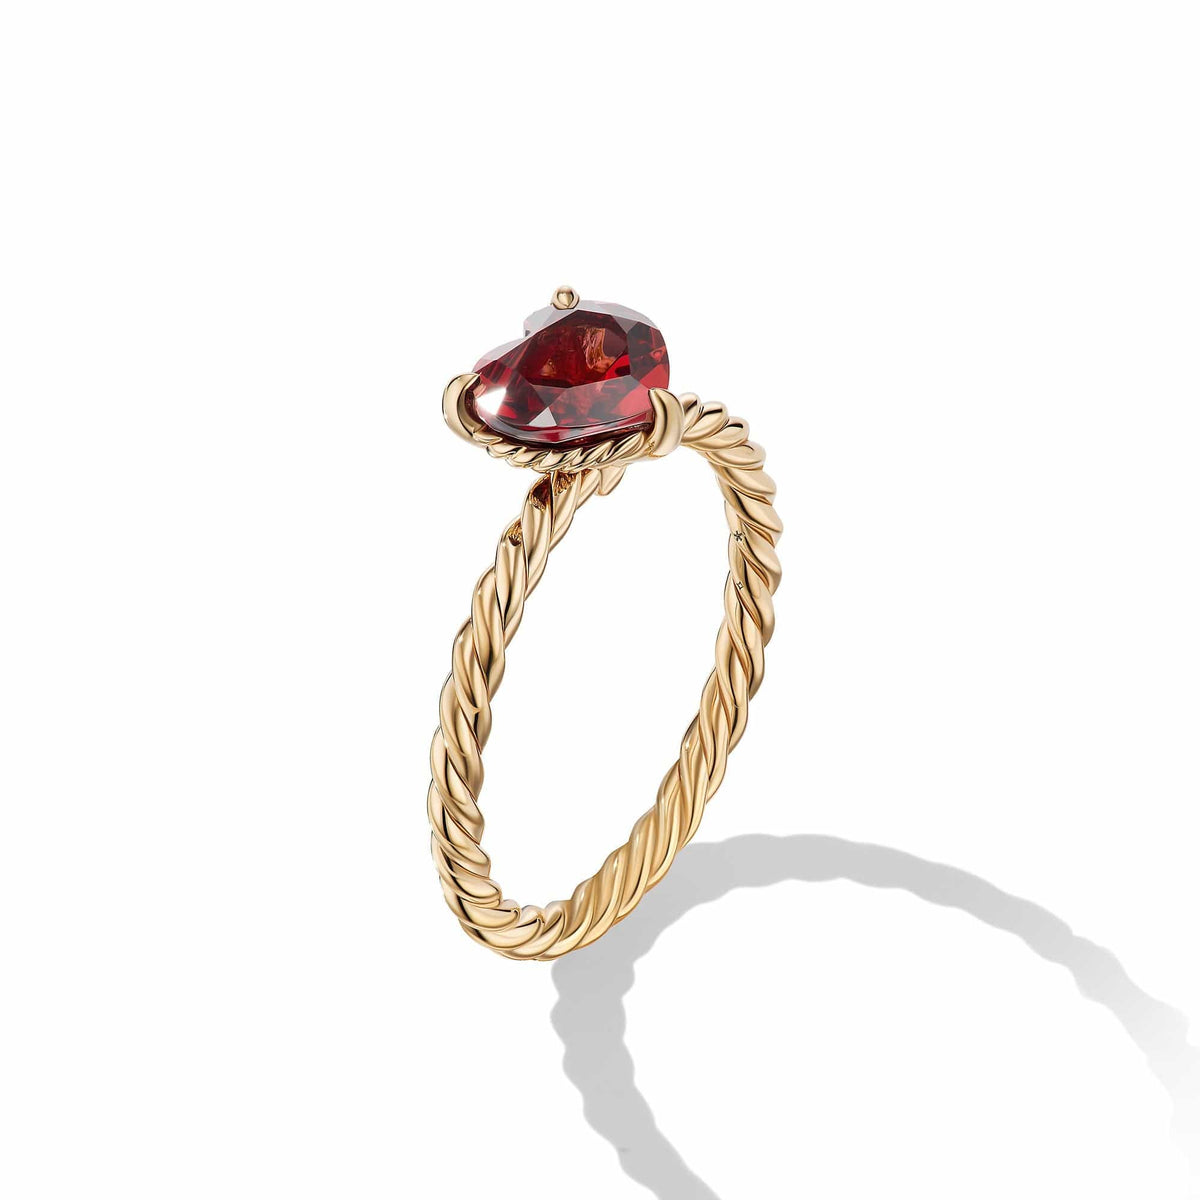 Chatelaine® Heart Ring in 18K Yellow Gold with Garnet